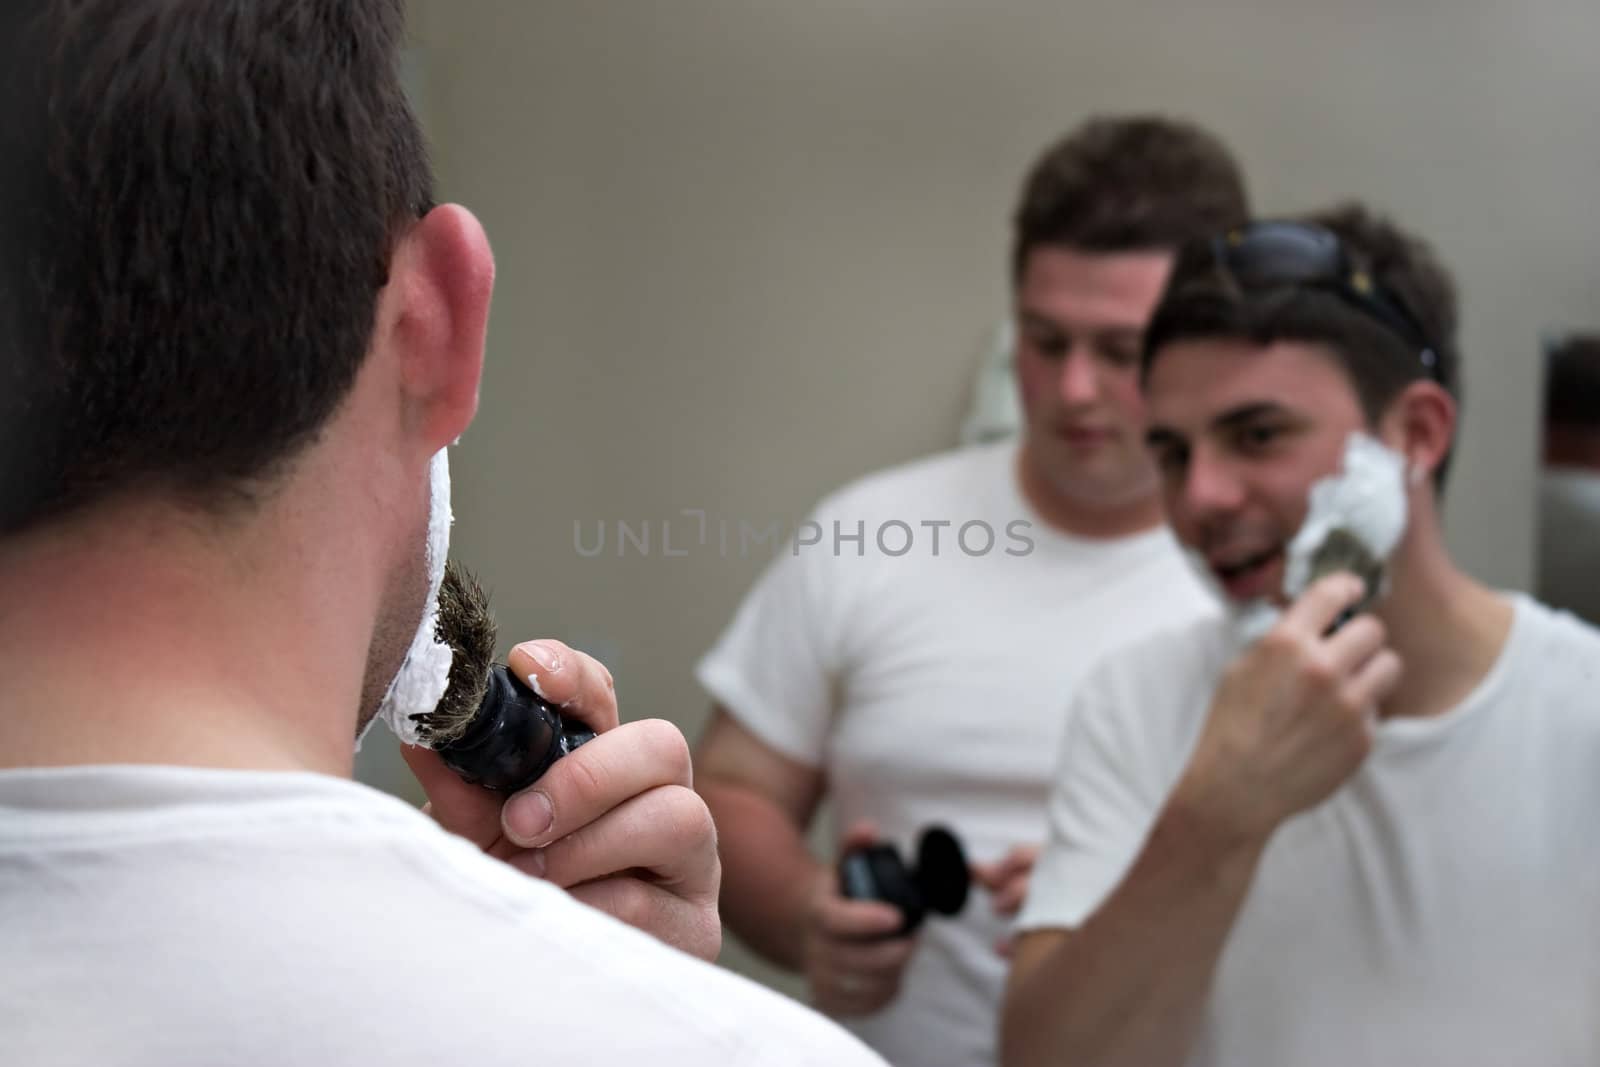 Two groomsmen shaving and gettin ready for the big event.  Shallow depth of field with focus on the foreground.